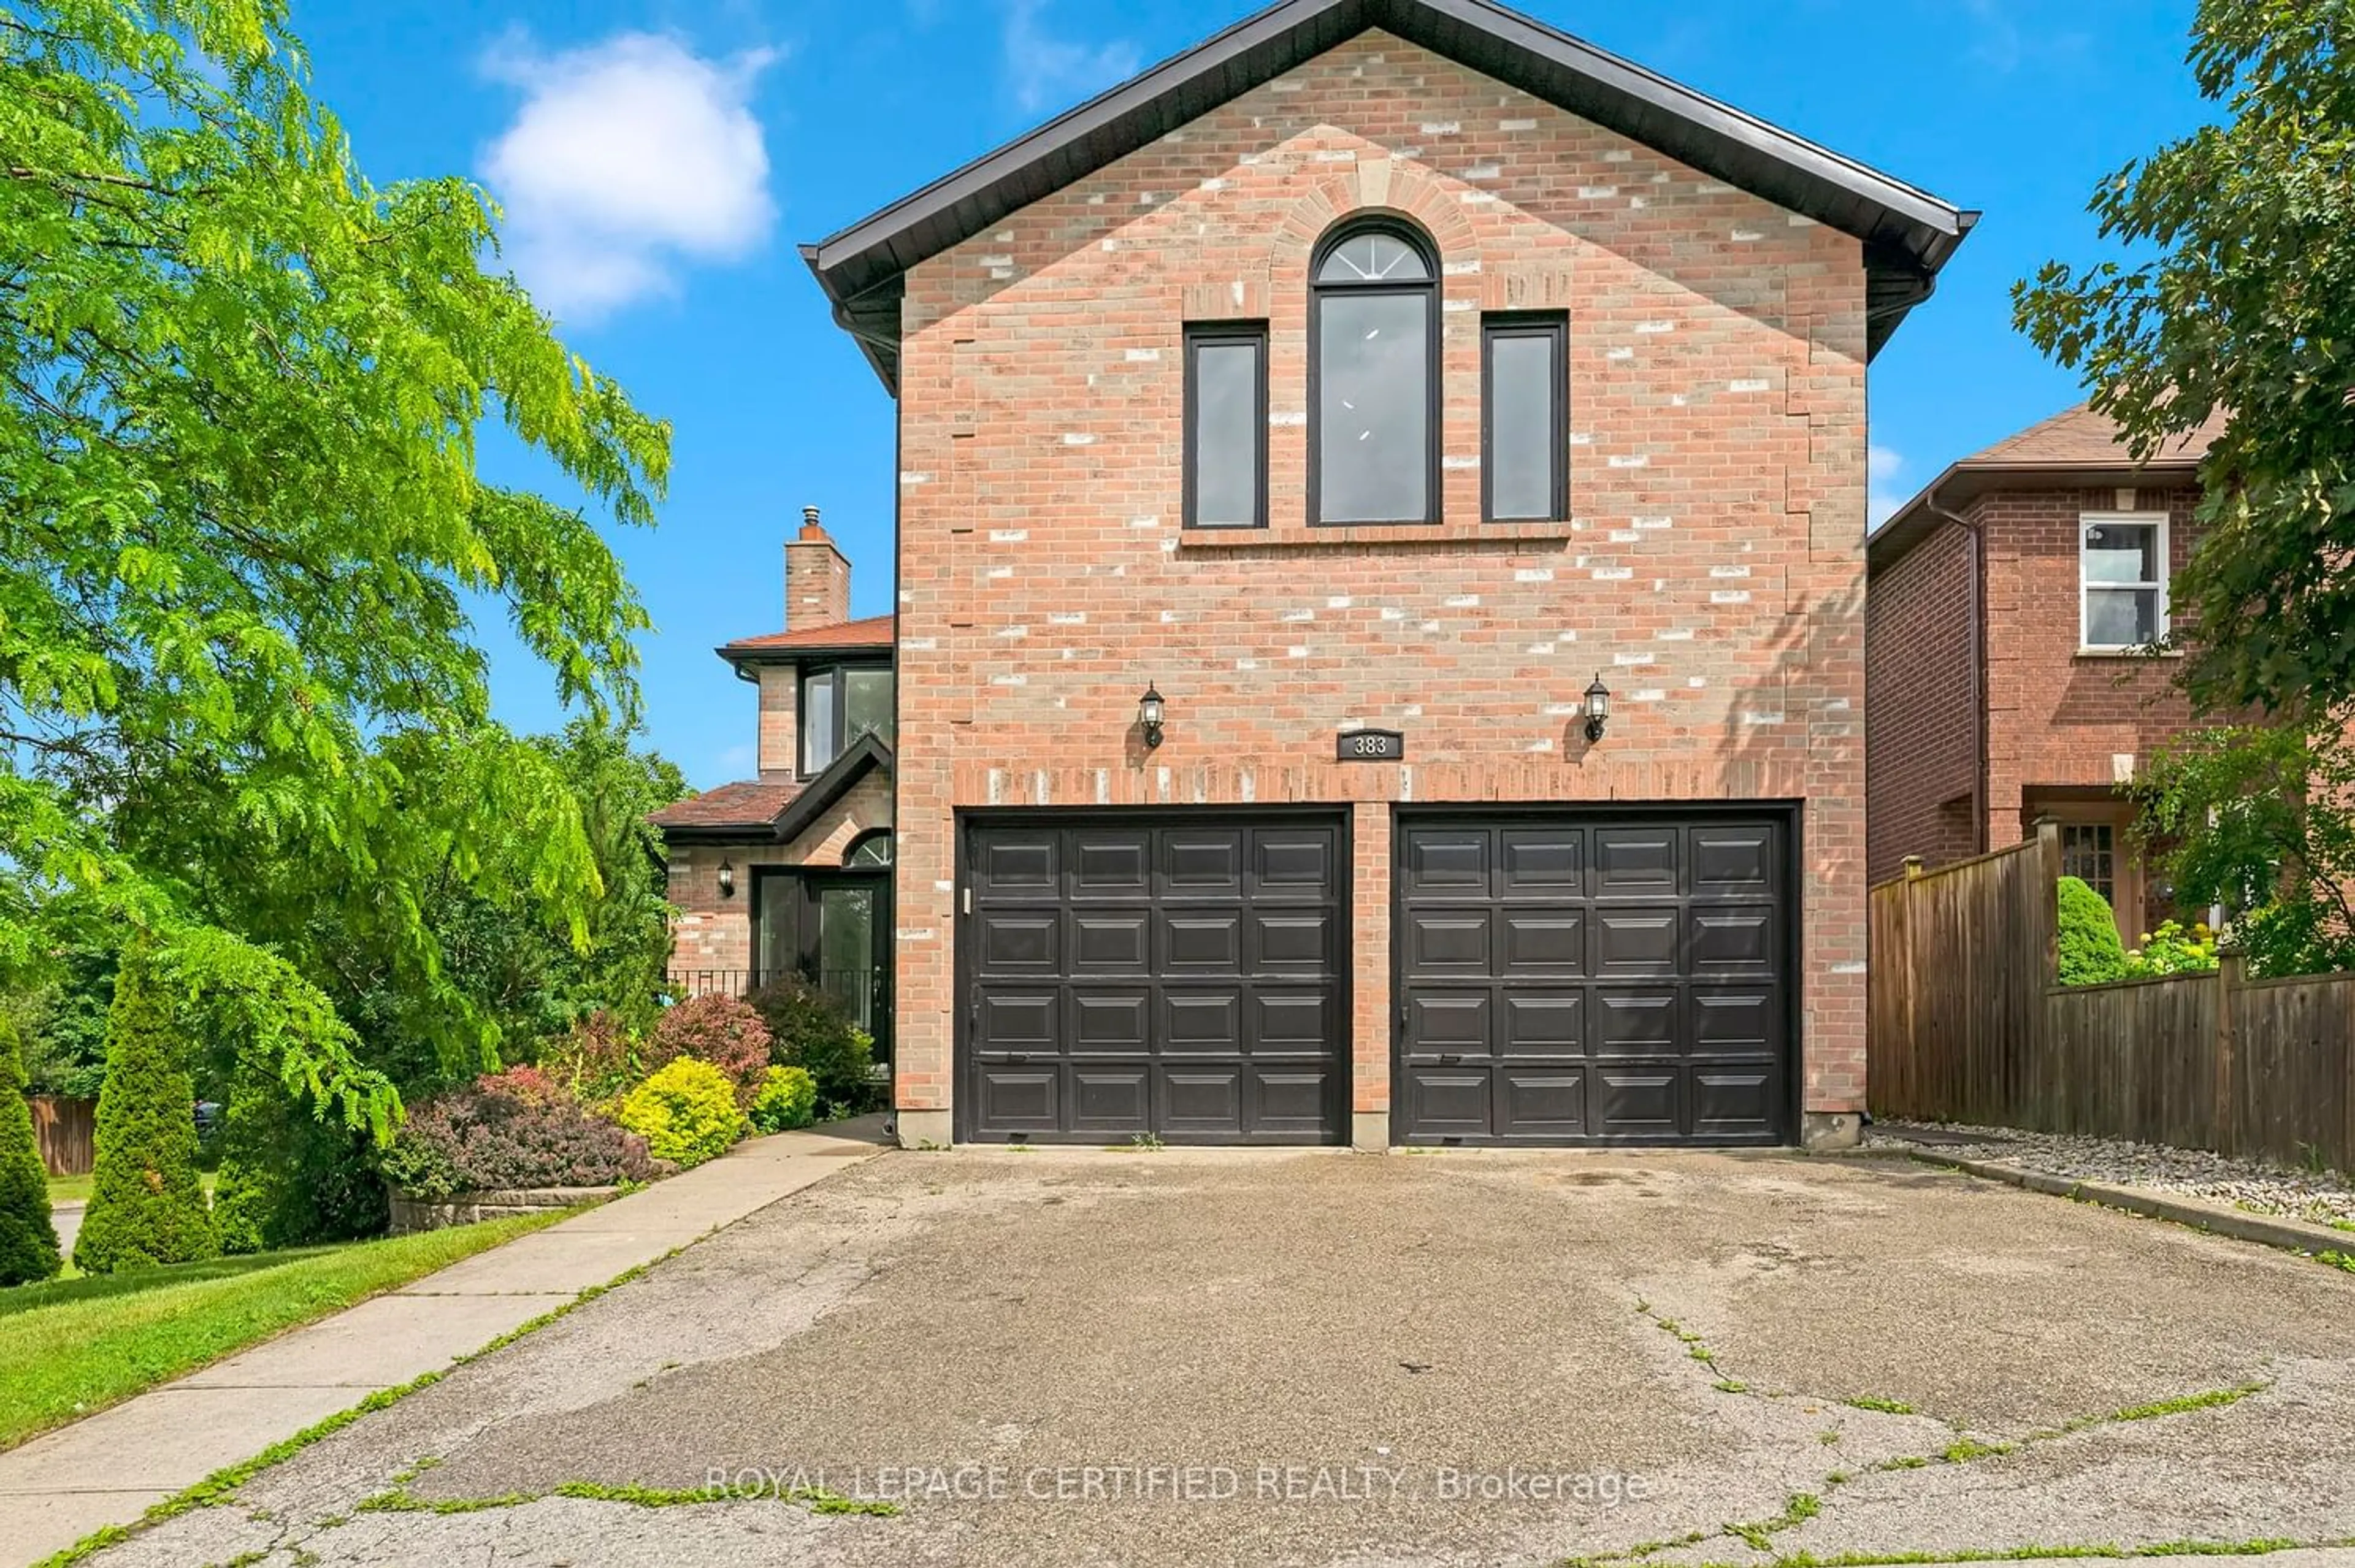 Home with brick exterior material for 383 Burnett Ave, Cambridge Ontario N1T 1G7